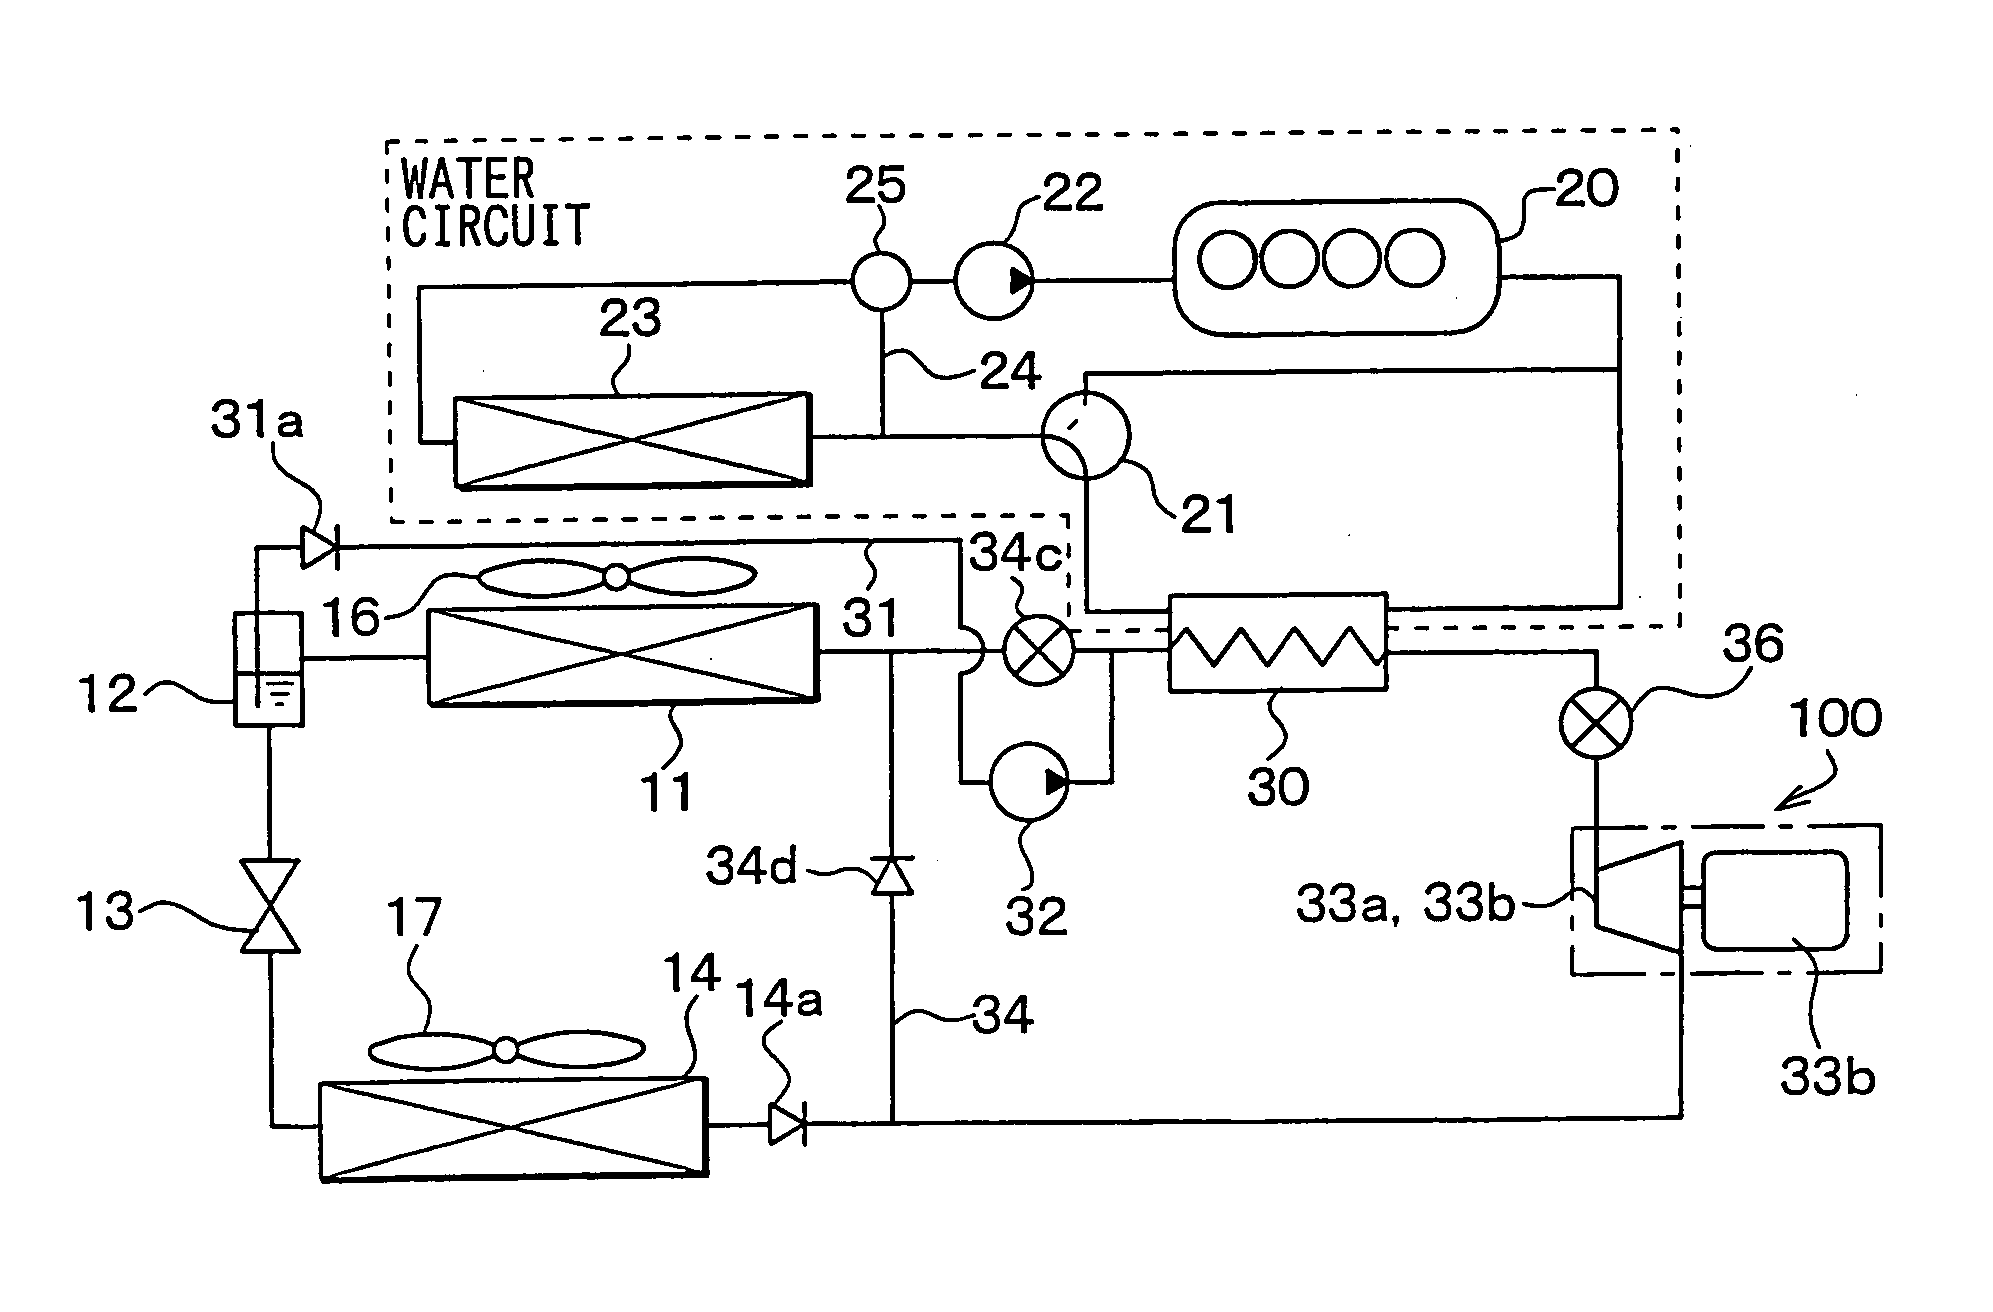 Vapor-compression refrigerant cycle system with refrigeration cycle and Rankine cycle